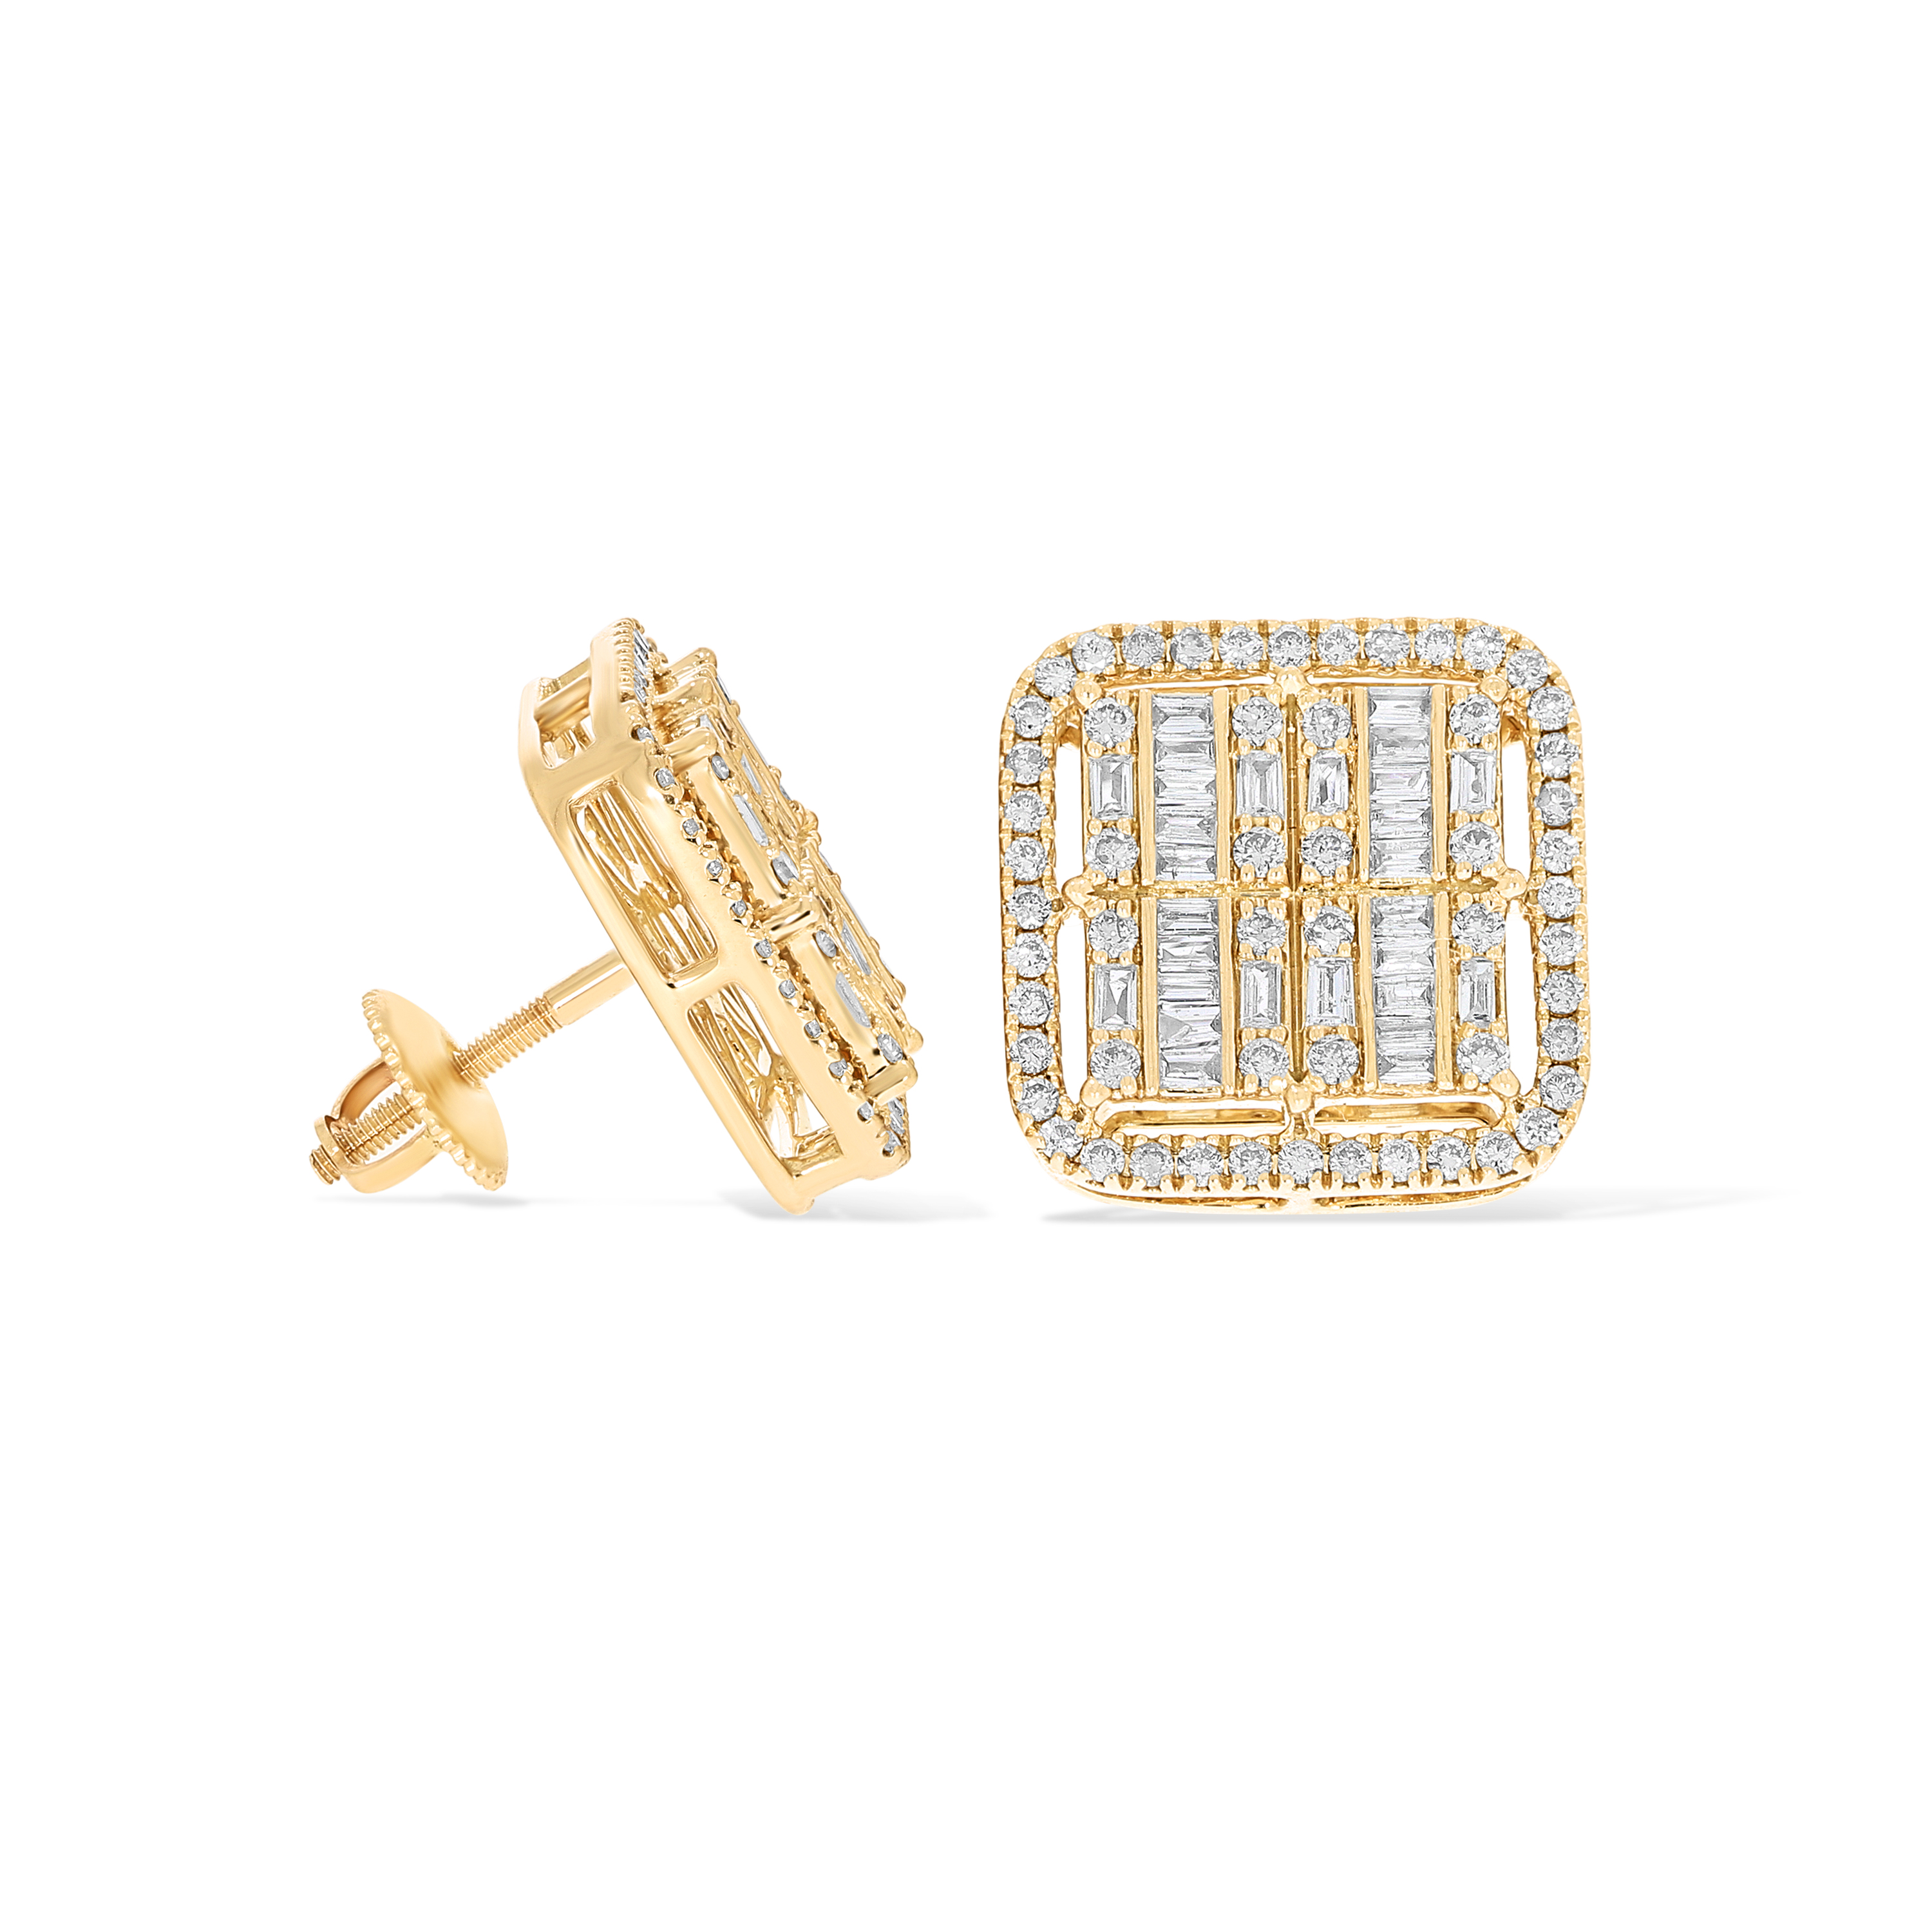 Rounded Square Baguette Diamond Earrings 1.32 ct. 14k Yellow Gold